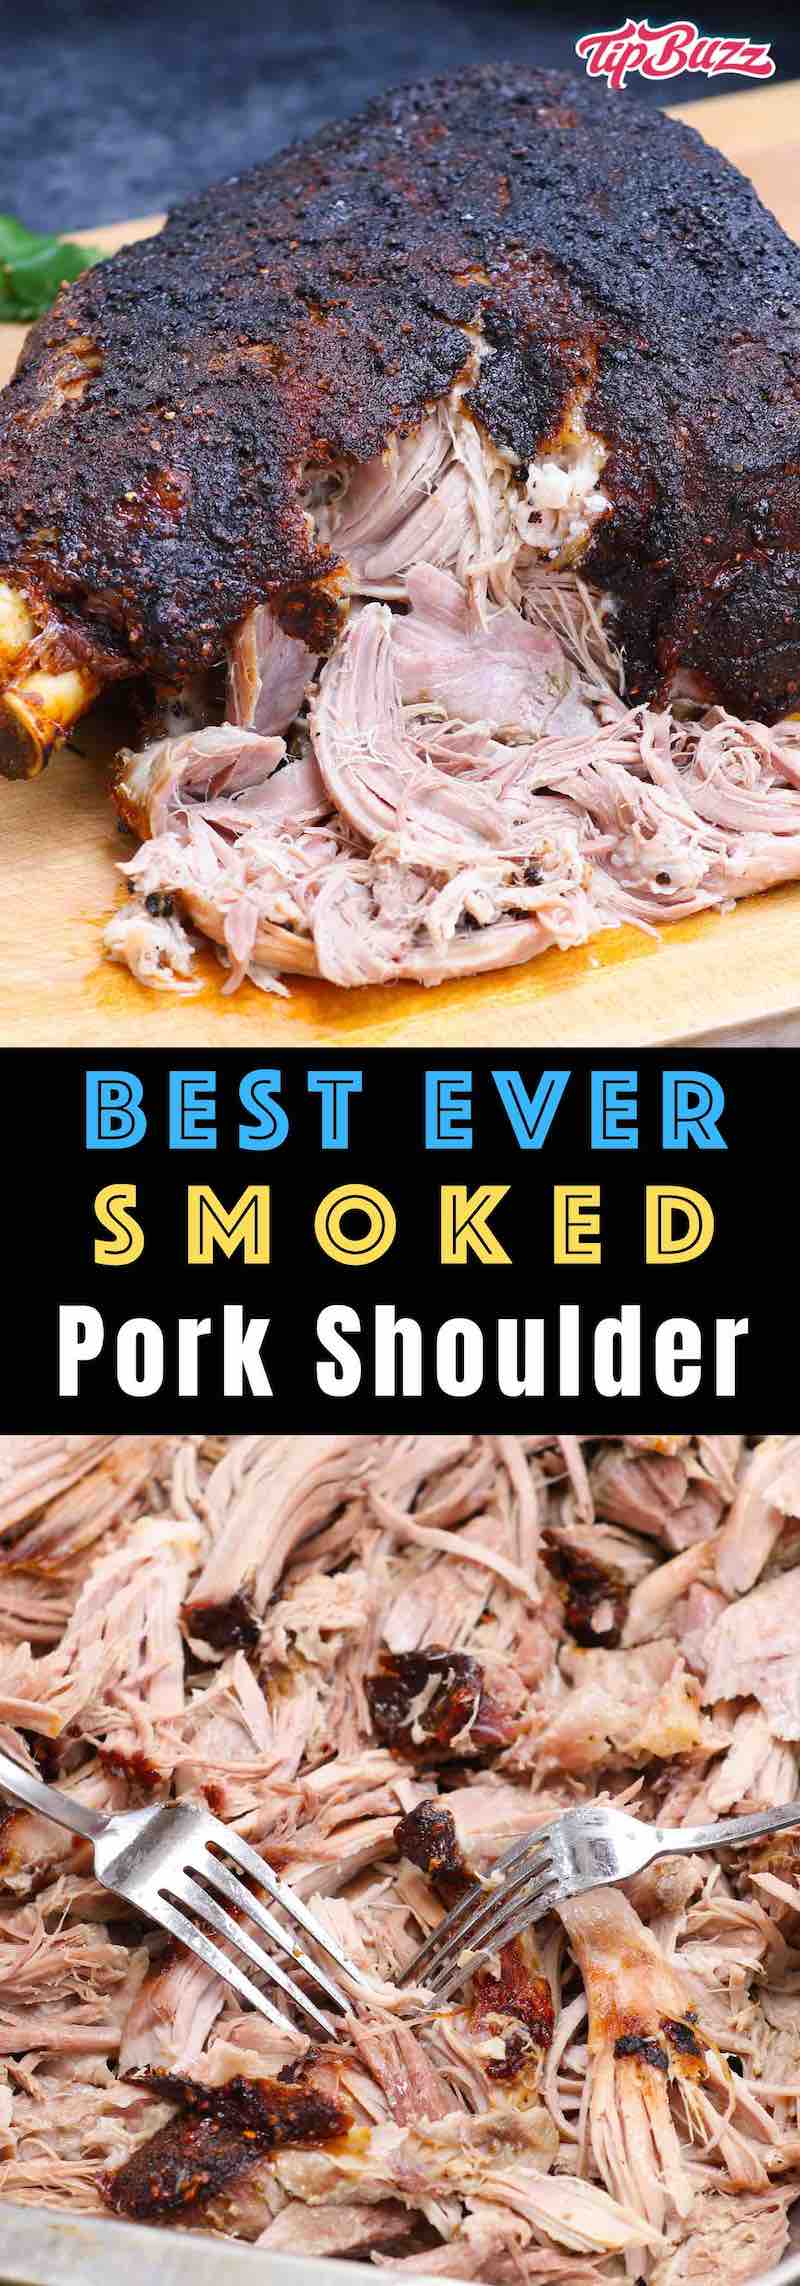 Smoked Pork Shoulder that's tender, flavorful and perfect for pulled pork! Learn how to make it including smoking times and temperatures. #smokedpork